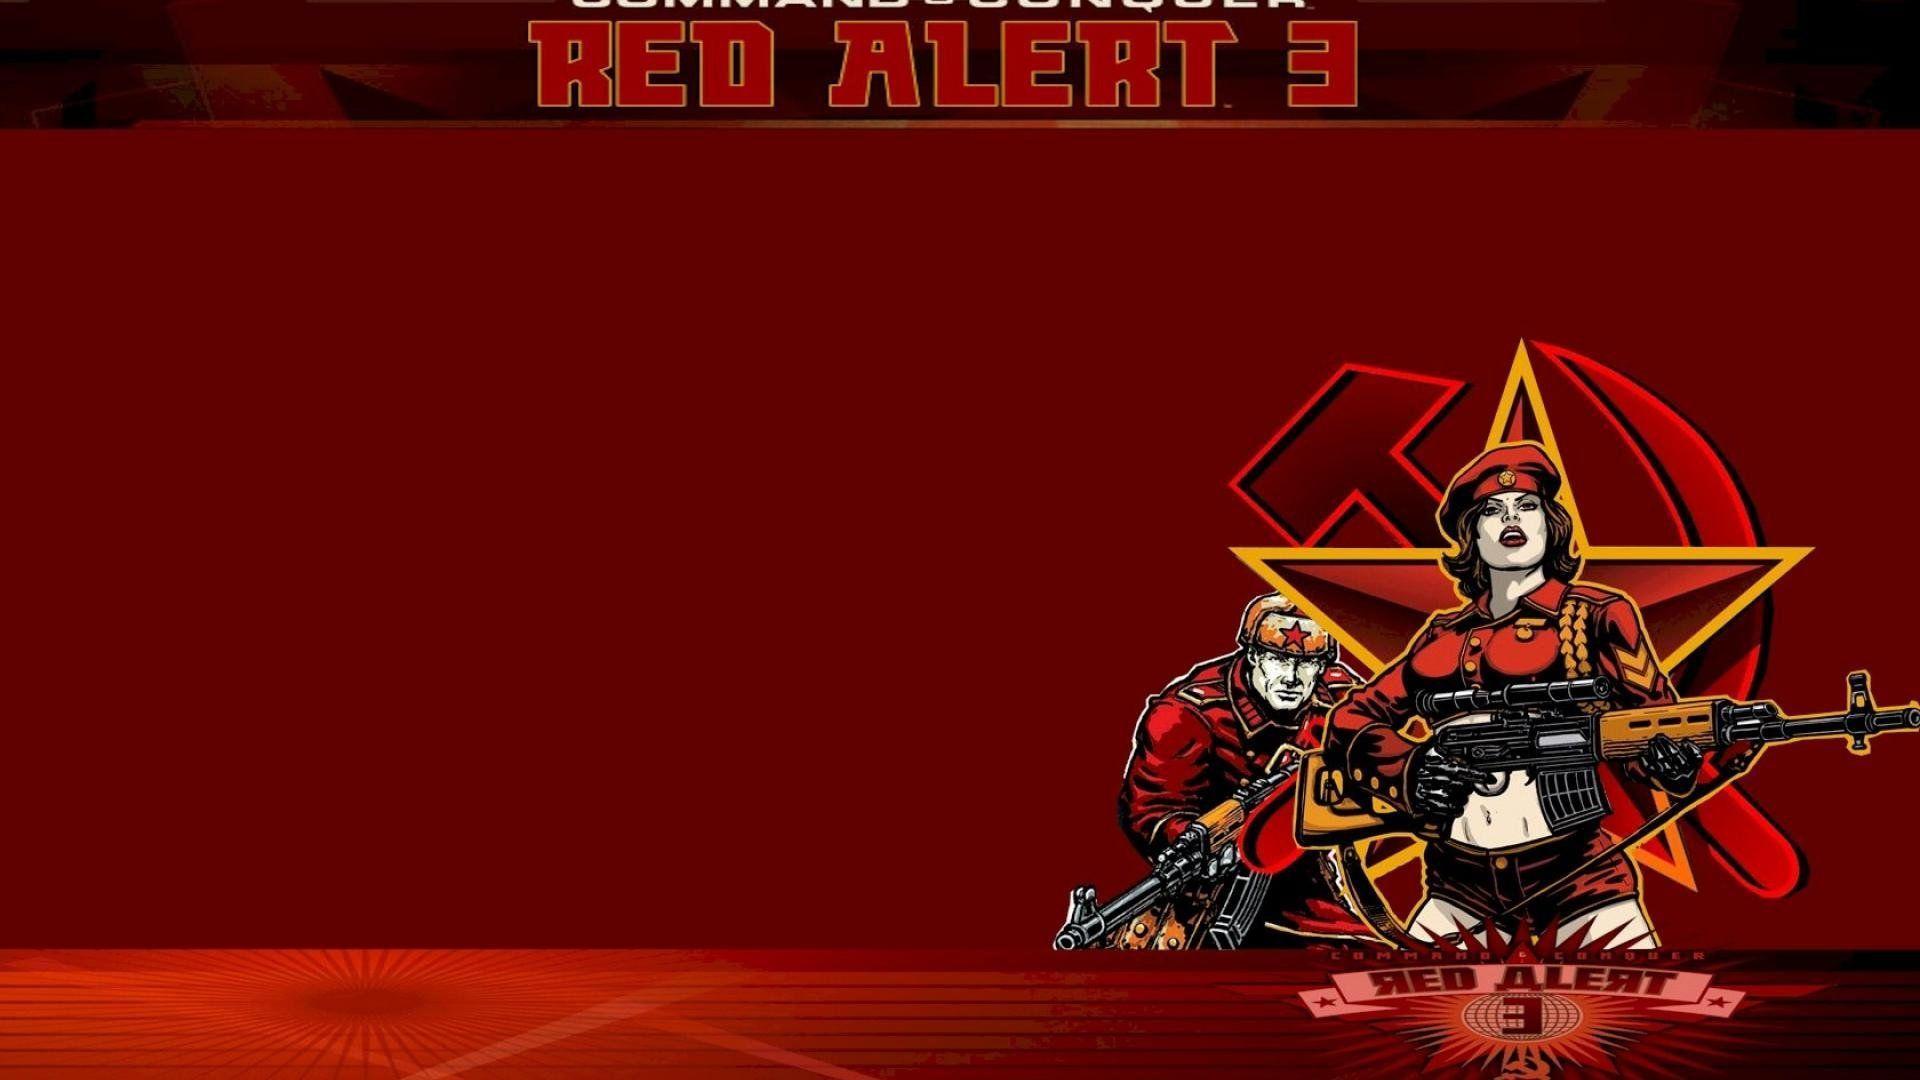 Command And Conquer Red Alert 3 Soviet Wallpaper